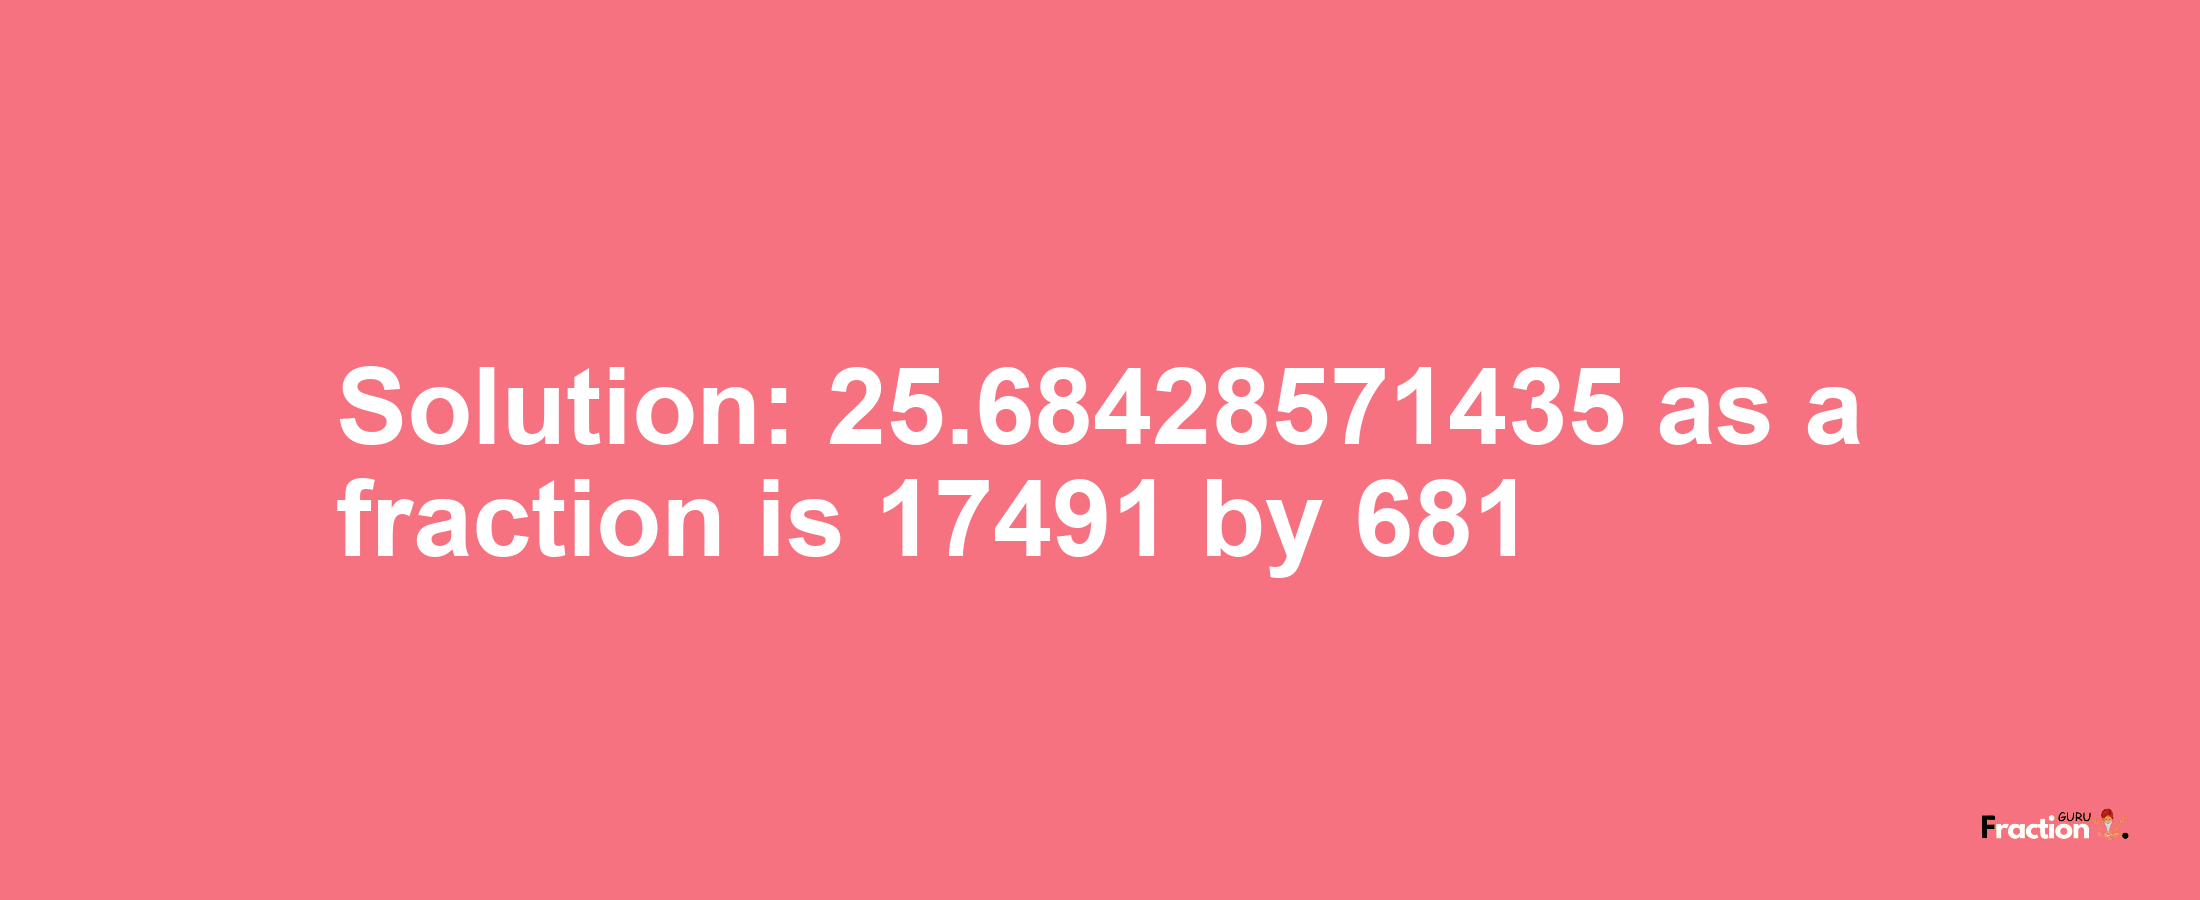 Solution:25.68428571435 as a fraction is 17491/681